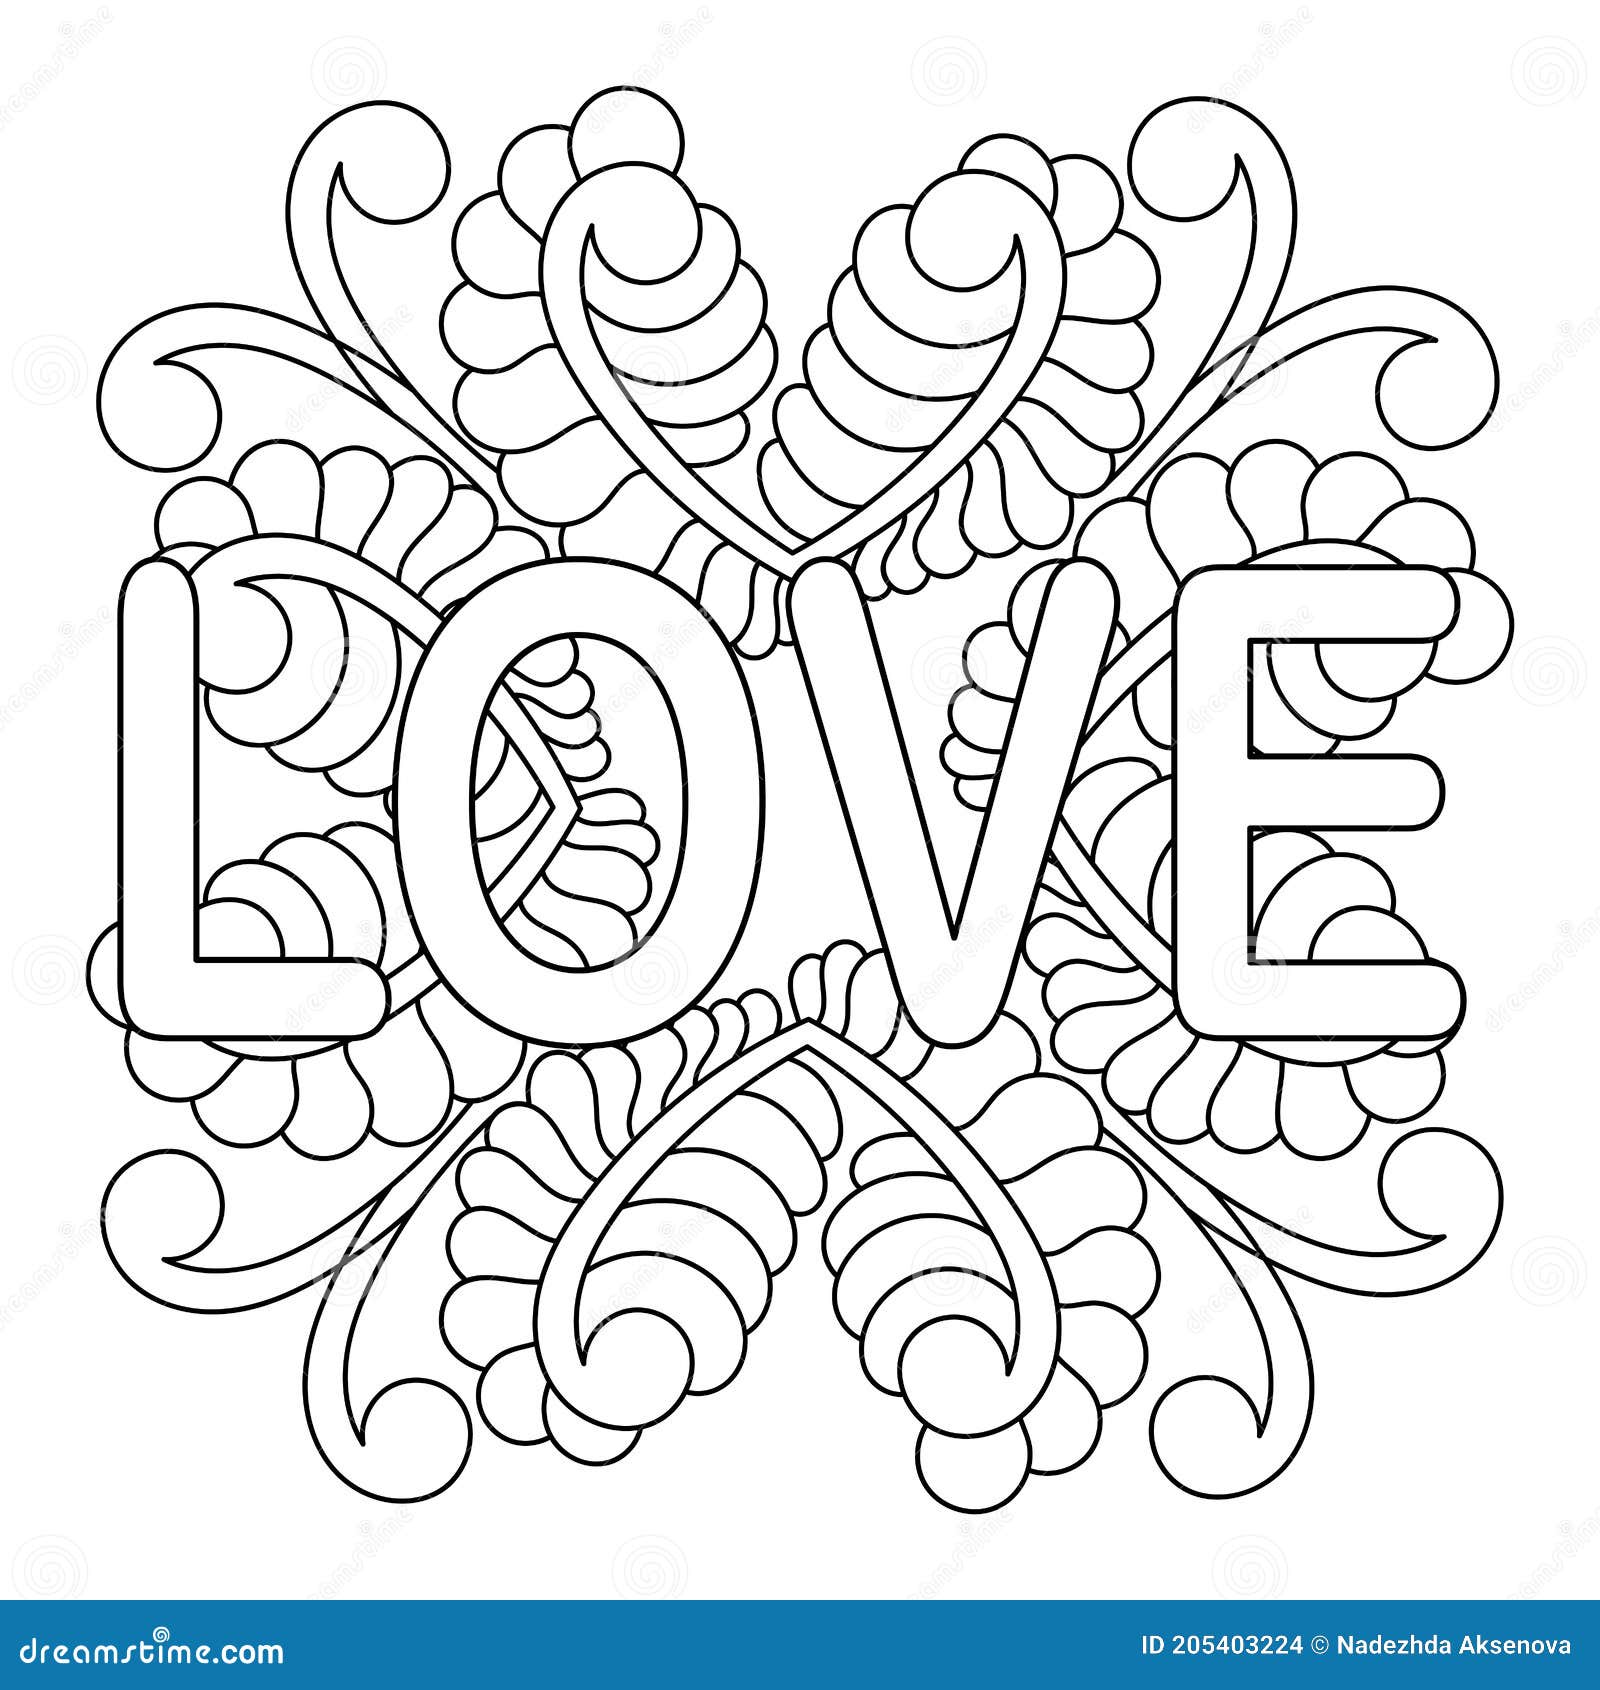 Word Love And Mandala For Coloring Book Coloring Page For Adult And